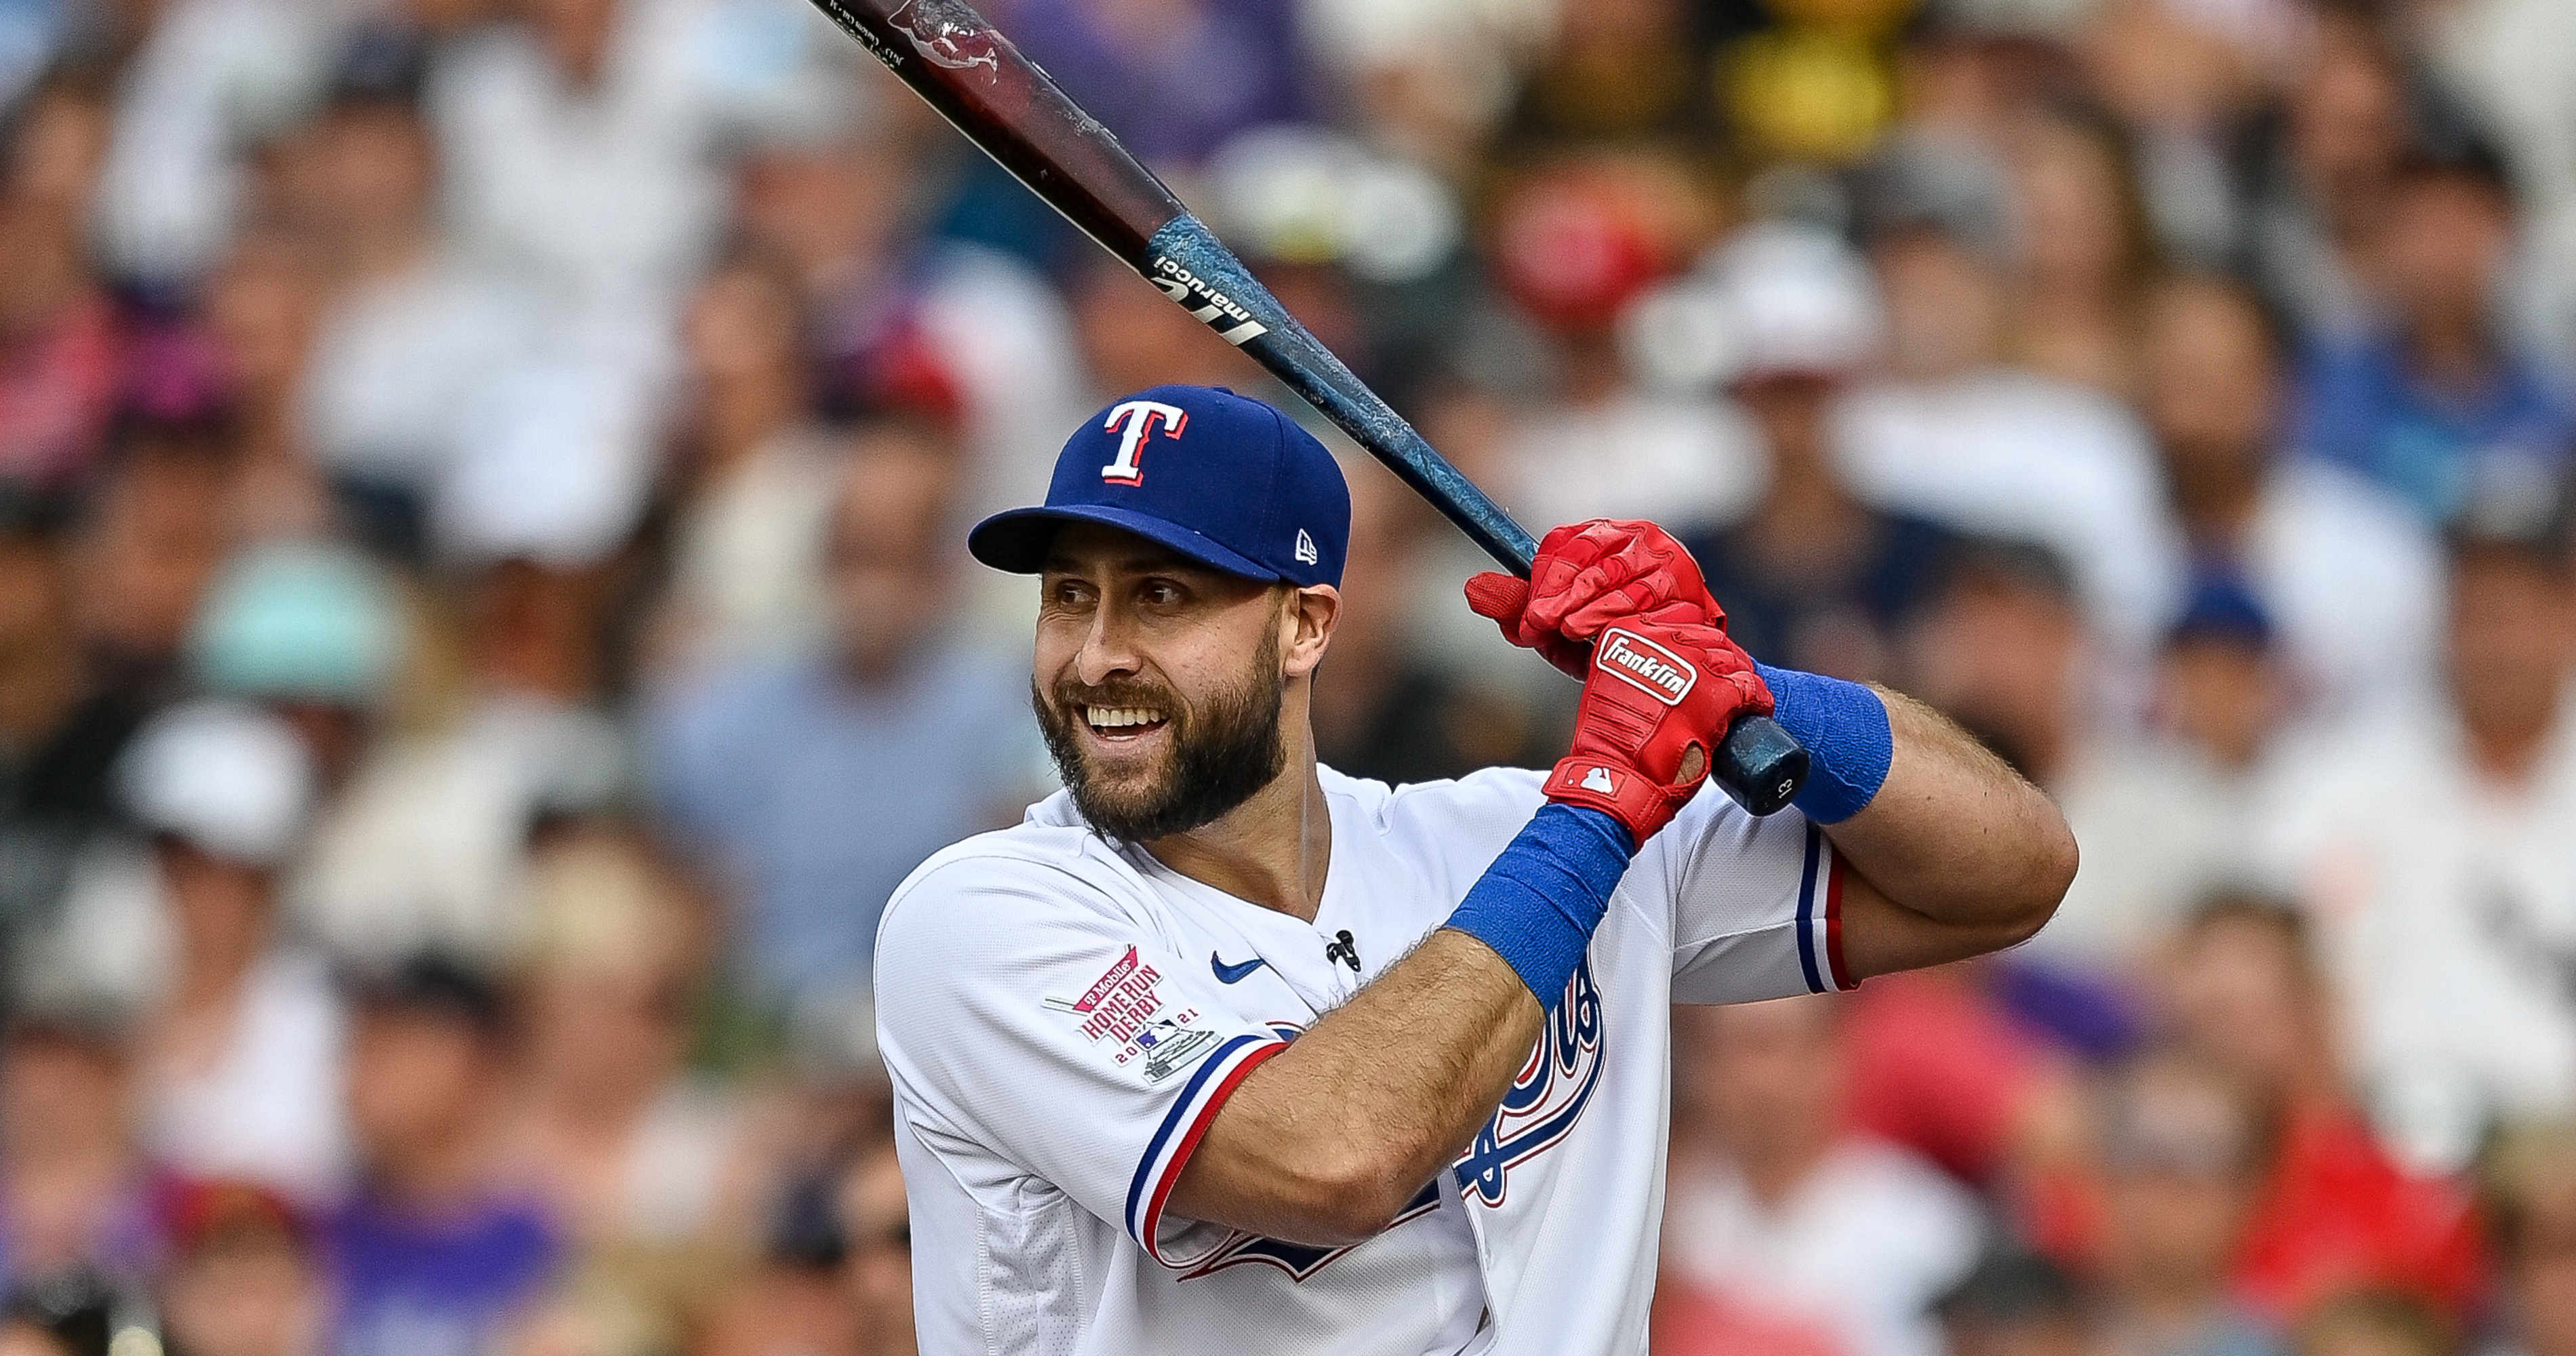 Joey Gallo on his time with Yankees: 'I didn't live up to expectations